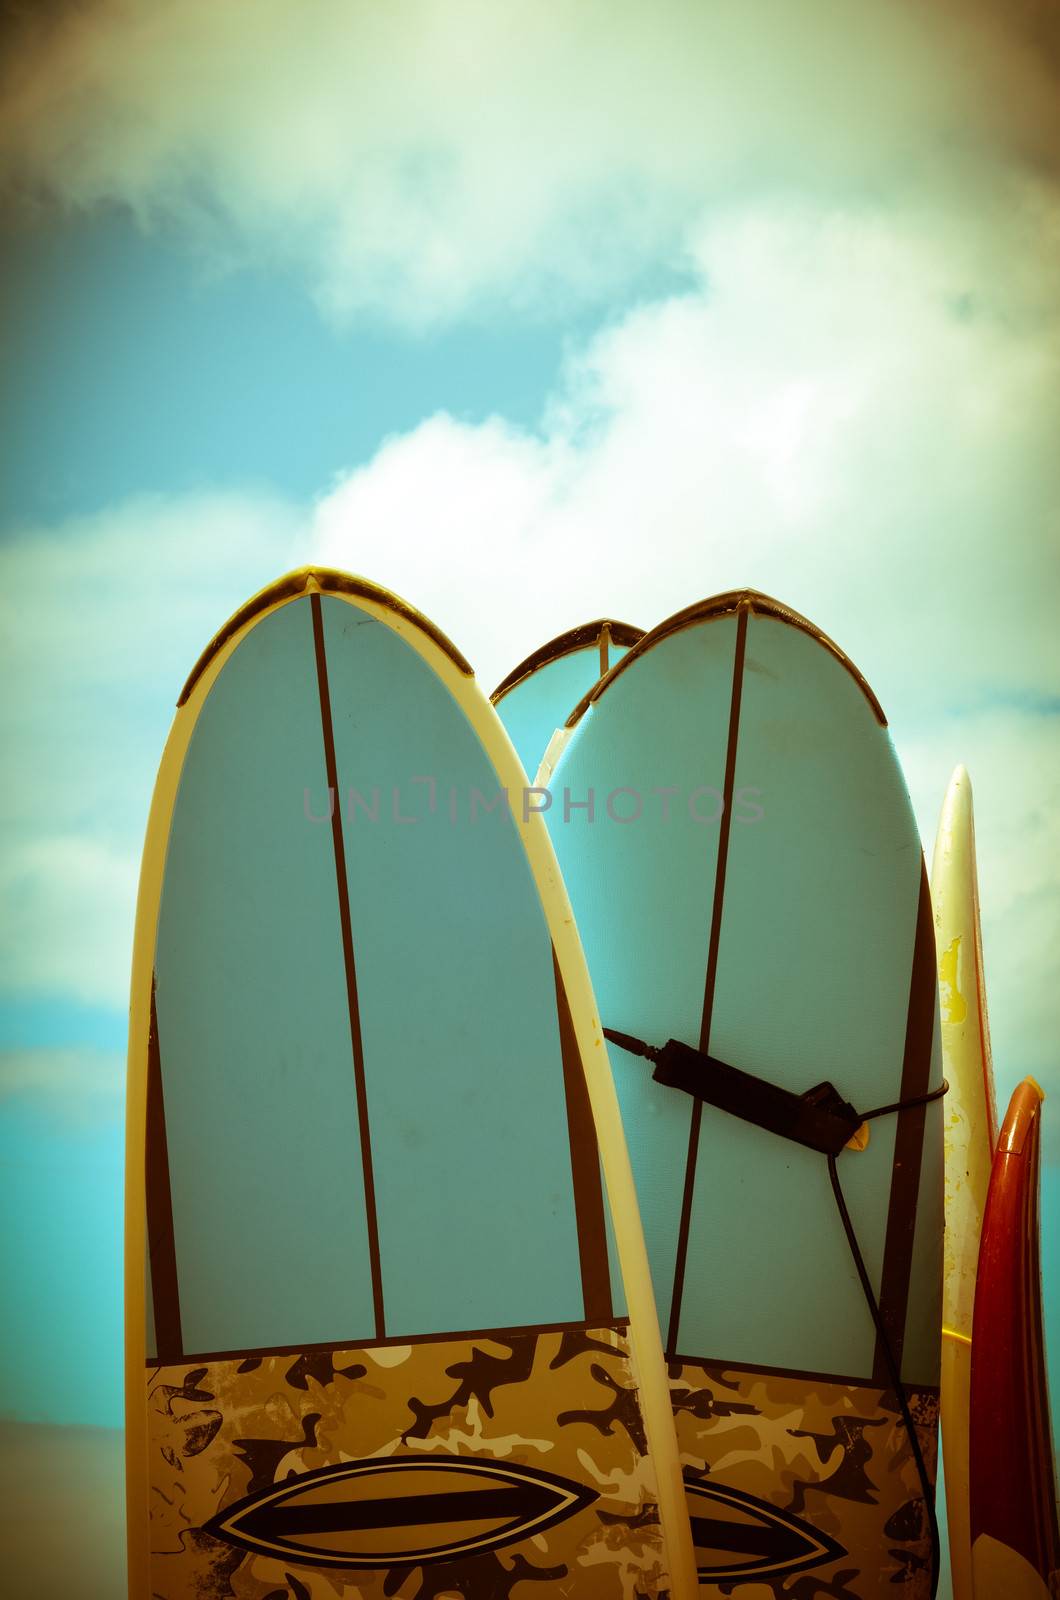 VIntage Hawaii Image Of Retro Styled Surf Boards